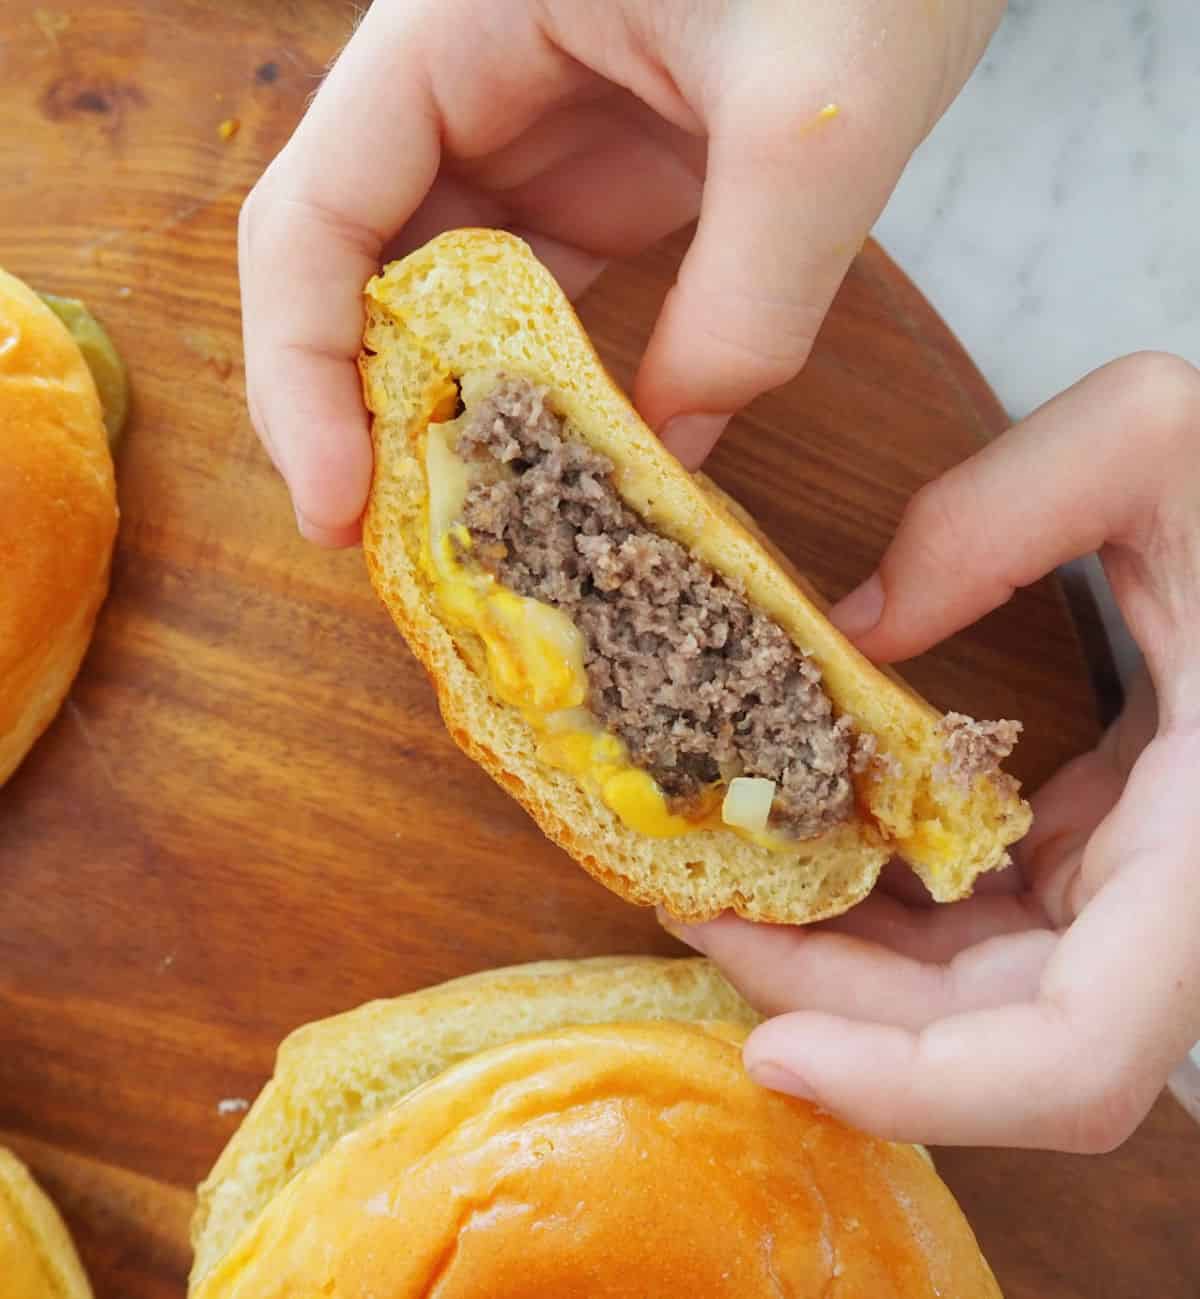 Cheeseburger cut in half being held by child